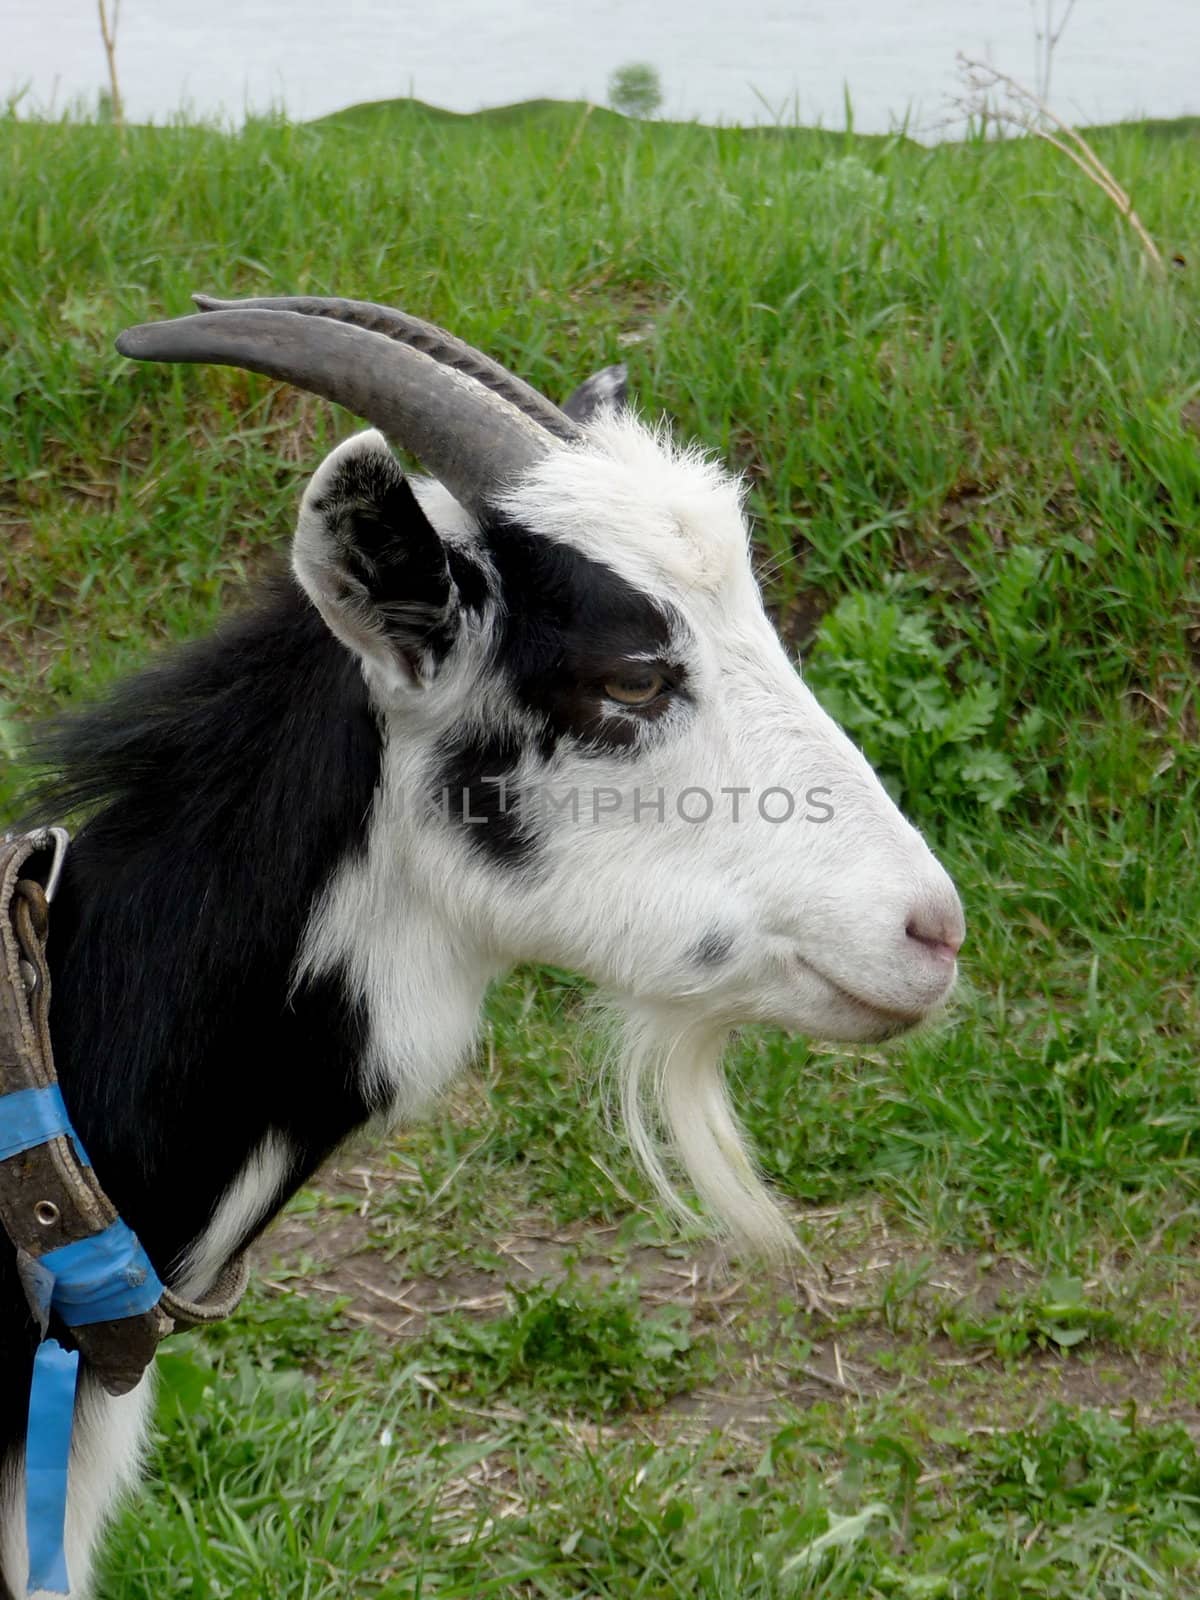 Goat by tomatto